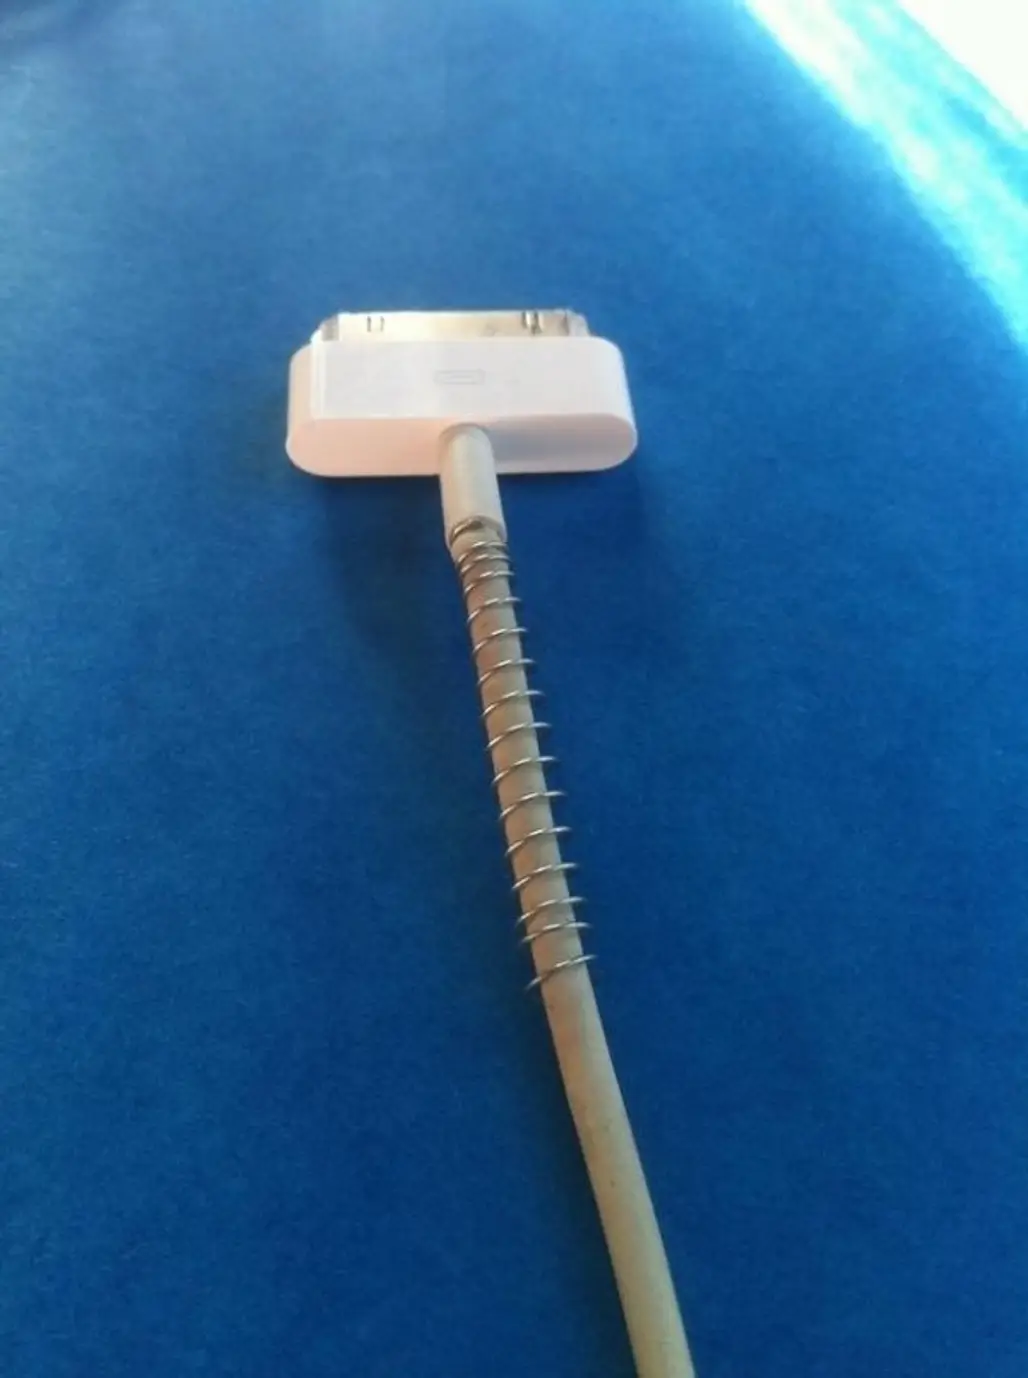 13. Use the Spring from an Old Pen to save Your Charger